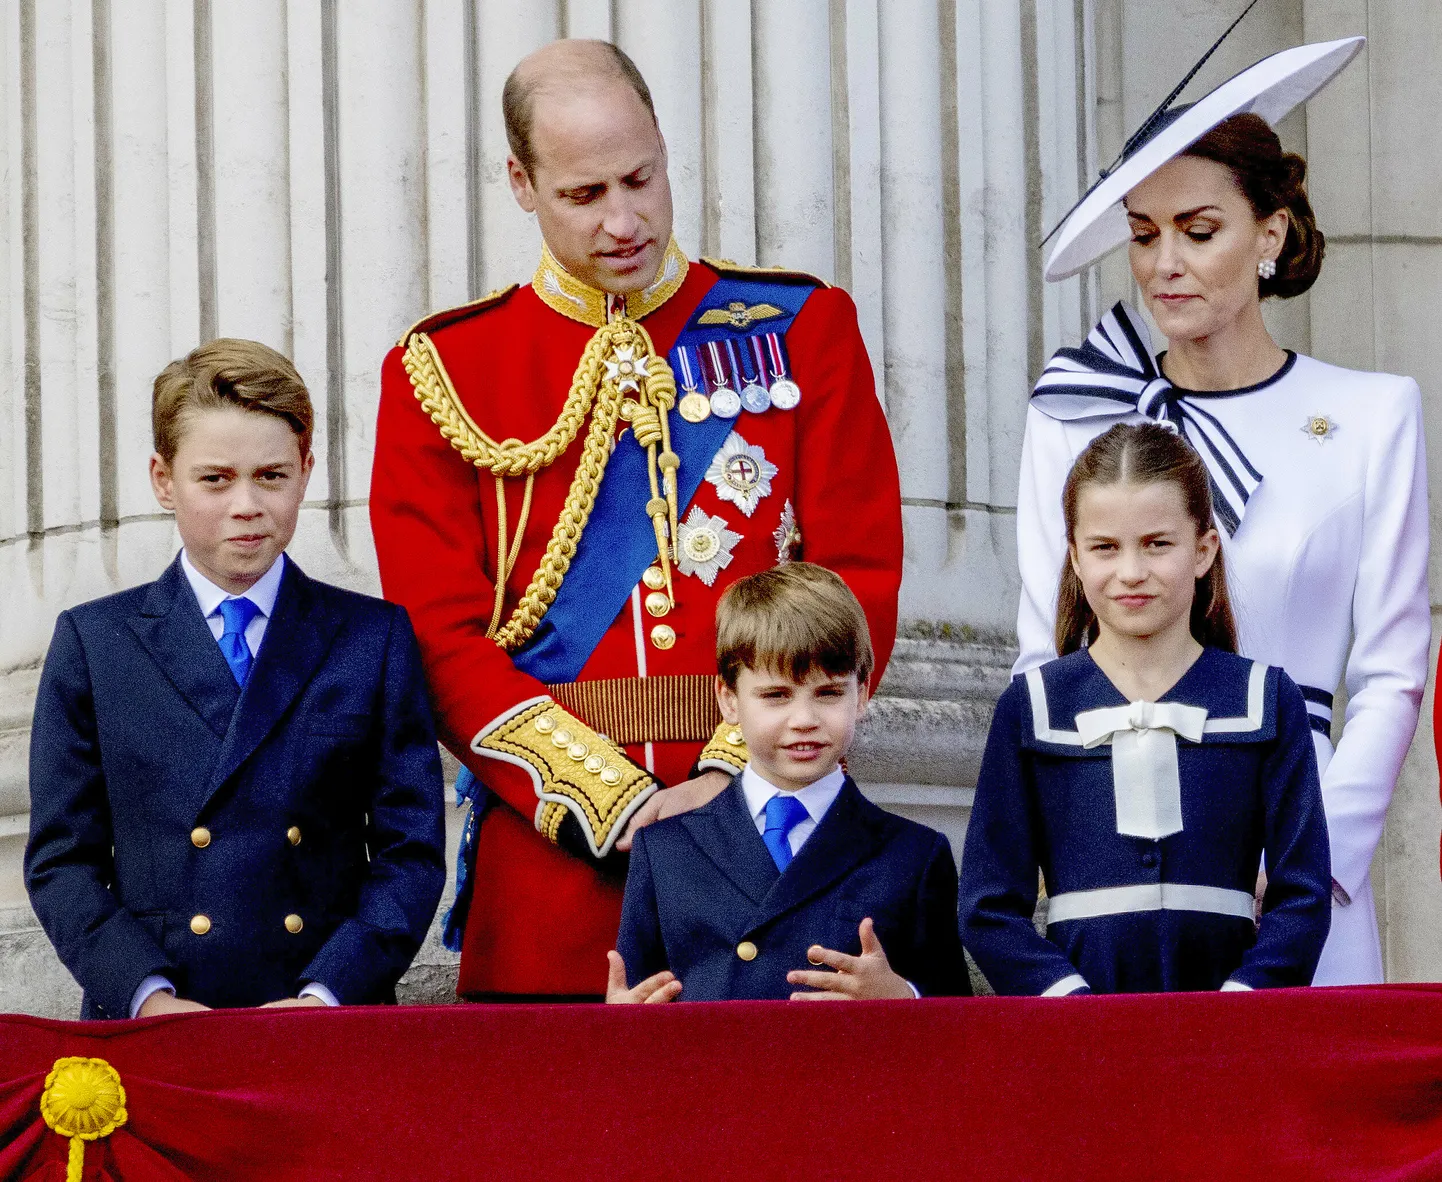 LONDON, ENGLAND - JUNE 15: Prince George of Wales, Prince William, Prince of Wales, Prince Louis of Wales, Princess Charlotte of Wales and Catherine, Princess of Wales appear on the balcony of Buckingham Palace during Trooping the Colour on June 15, 2024 in London, England. Trooping the Colour is a ceremonial parade celebrating the official birthday of the British Monarch. The event features over 1,400 soldiers and officers, accompanied by 200 horses. More than 400 musicians from ten different bands and Corps of Drums march and perform in perfect harmony NETHERLANDS OUT POINT THE VUE OUT